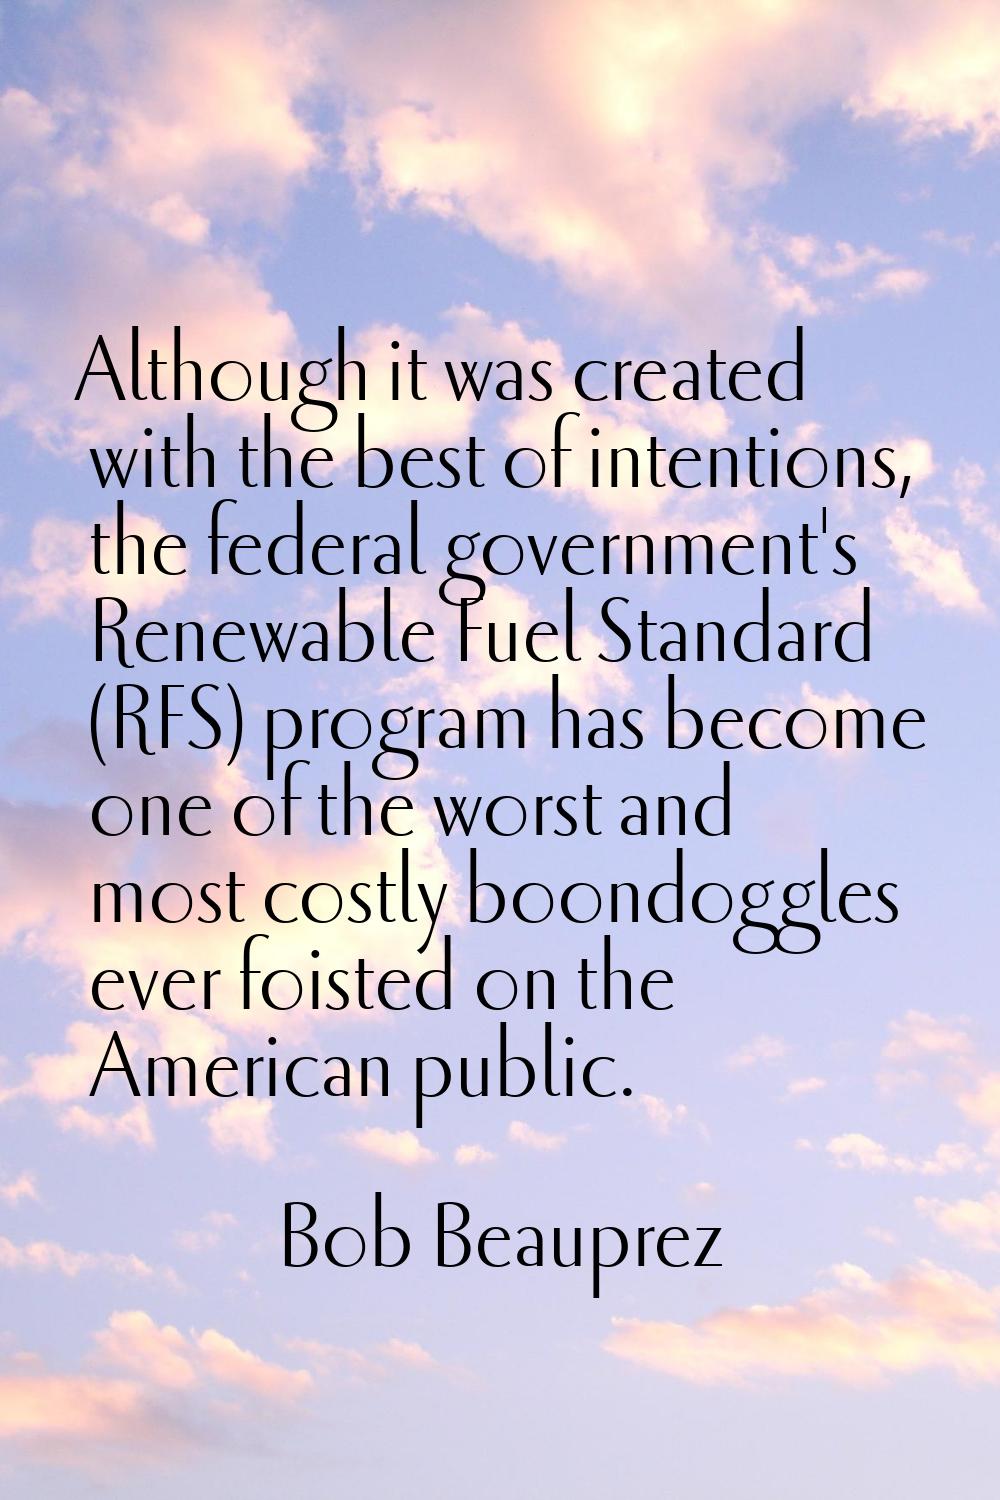 Although it was created with the best of intentions, the federal government's Renewable Fuel Standa